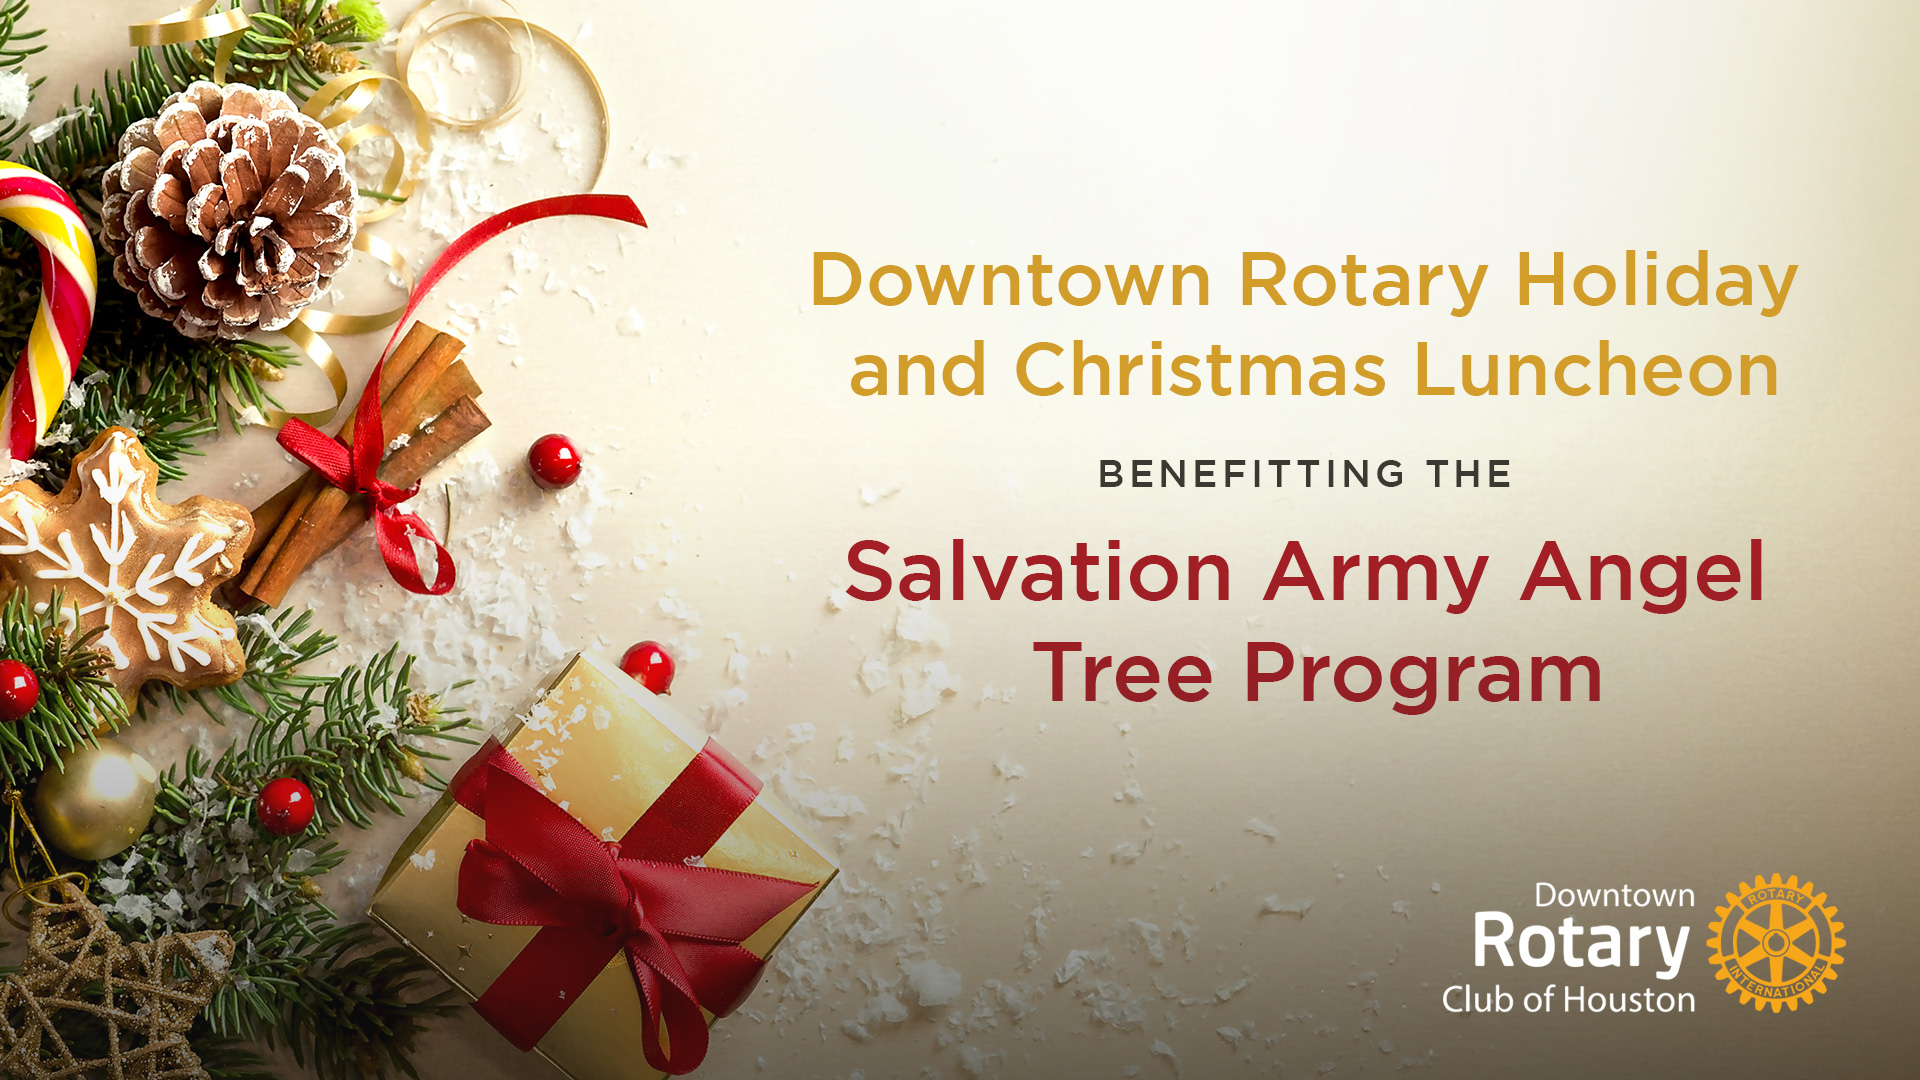 Downtown Rotary Holiday and Christmas luncheon benefitting the Salvation Army Angel Tree Program